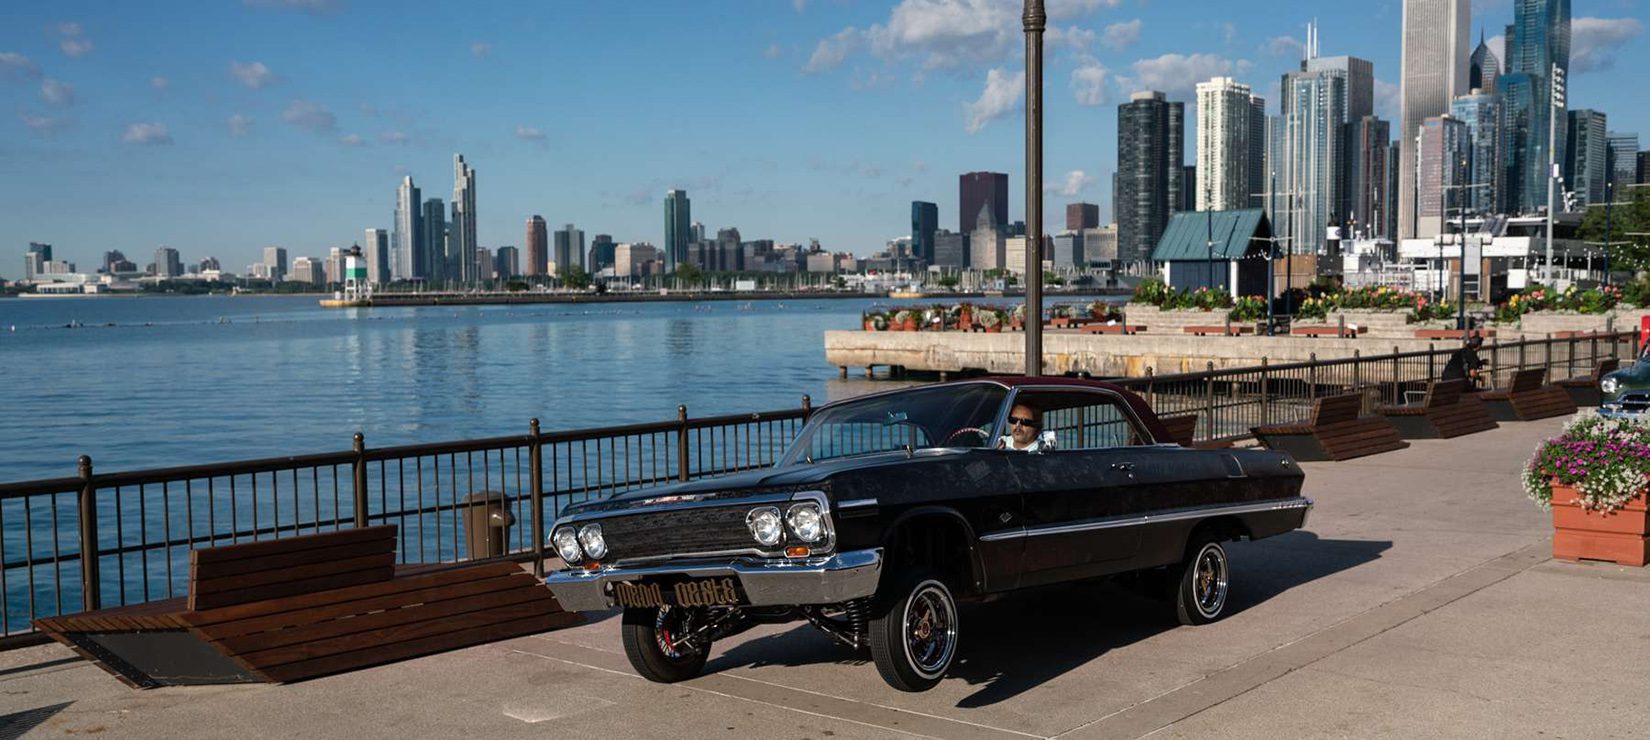 Navy Pier Hosts Slow&Low: Chicago Lowrider Festival